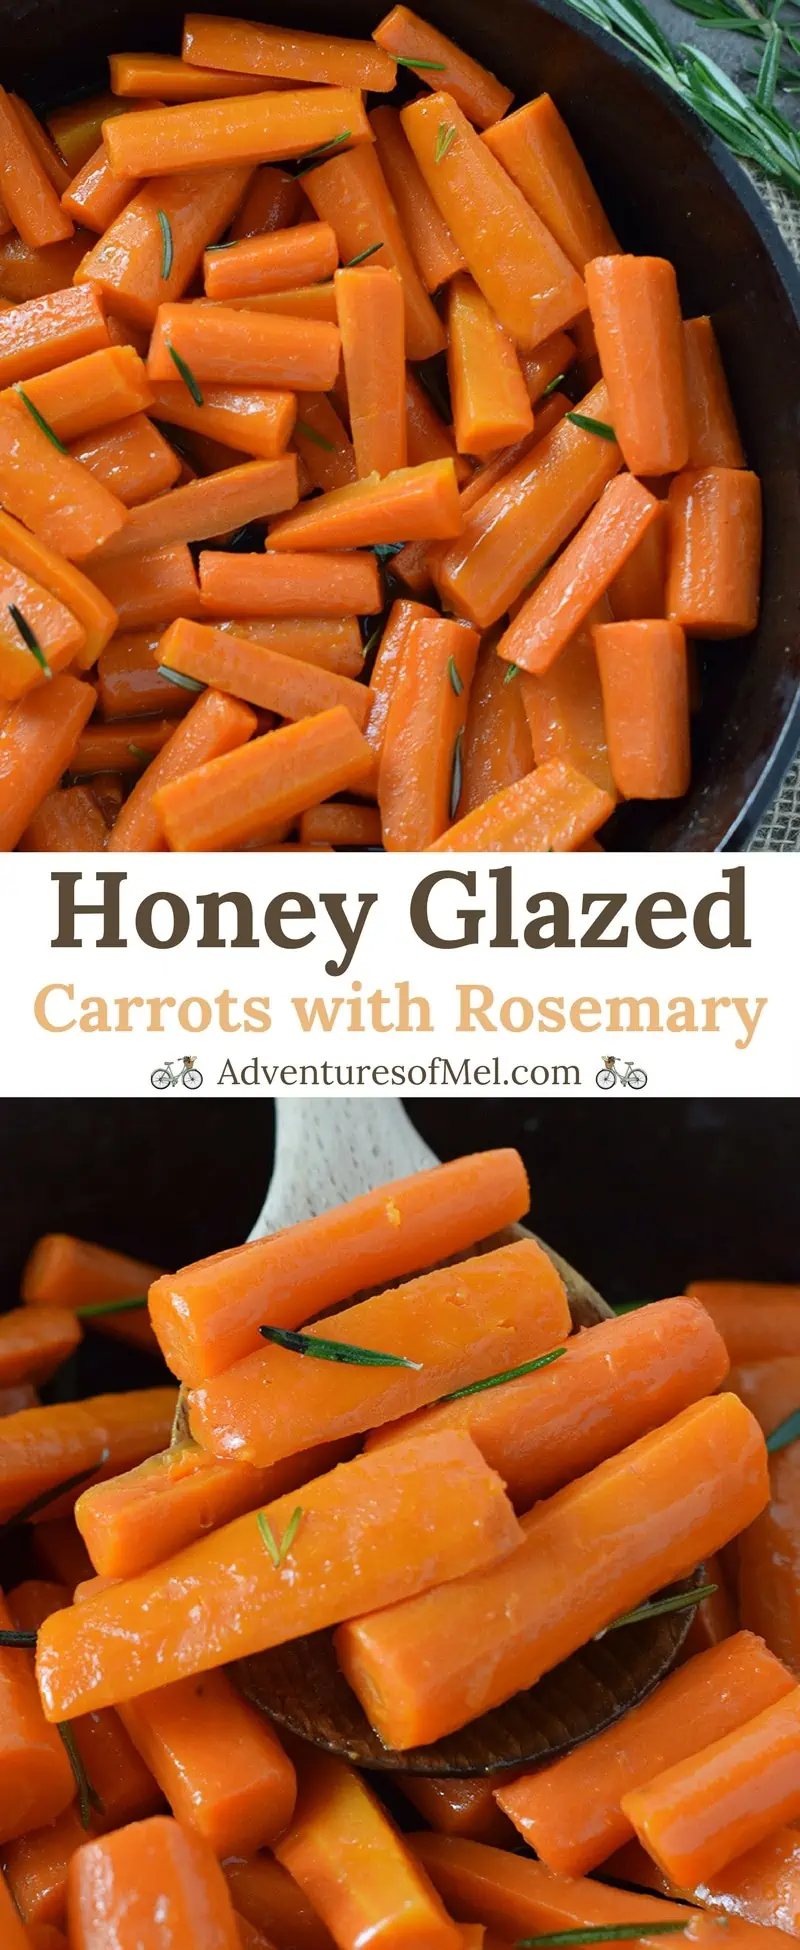 Honey Glazed Carrots, made with simple ingredients like butter, honey, and rosemary. Delicious side dish recipe, perfect for holidays or weeknight meals.